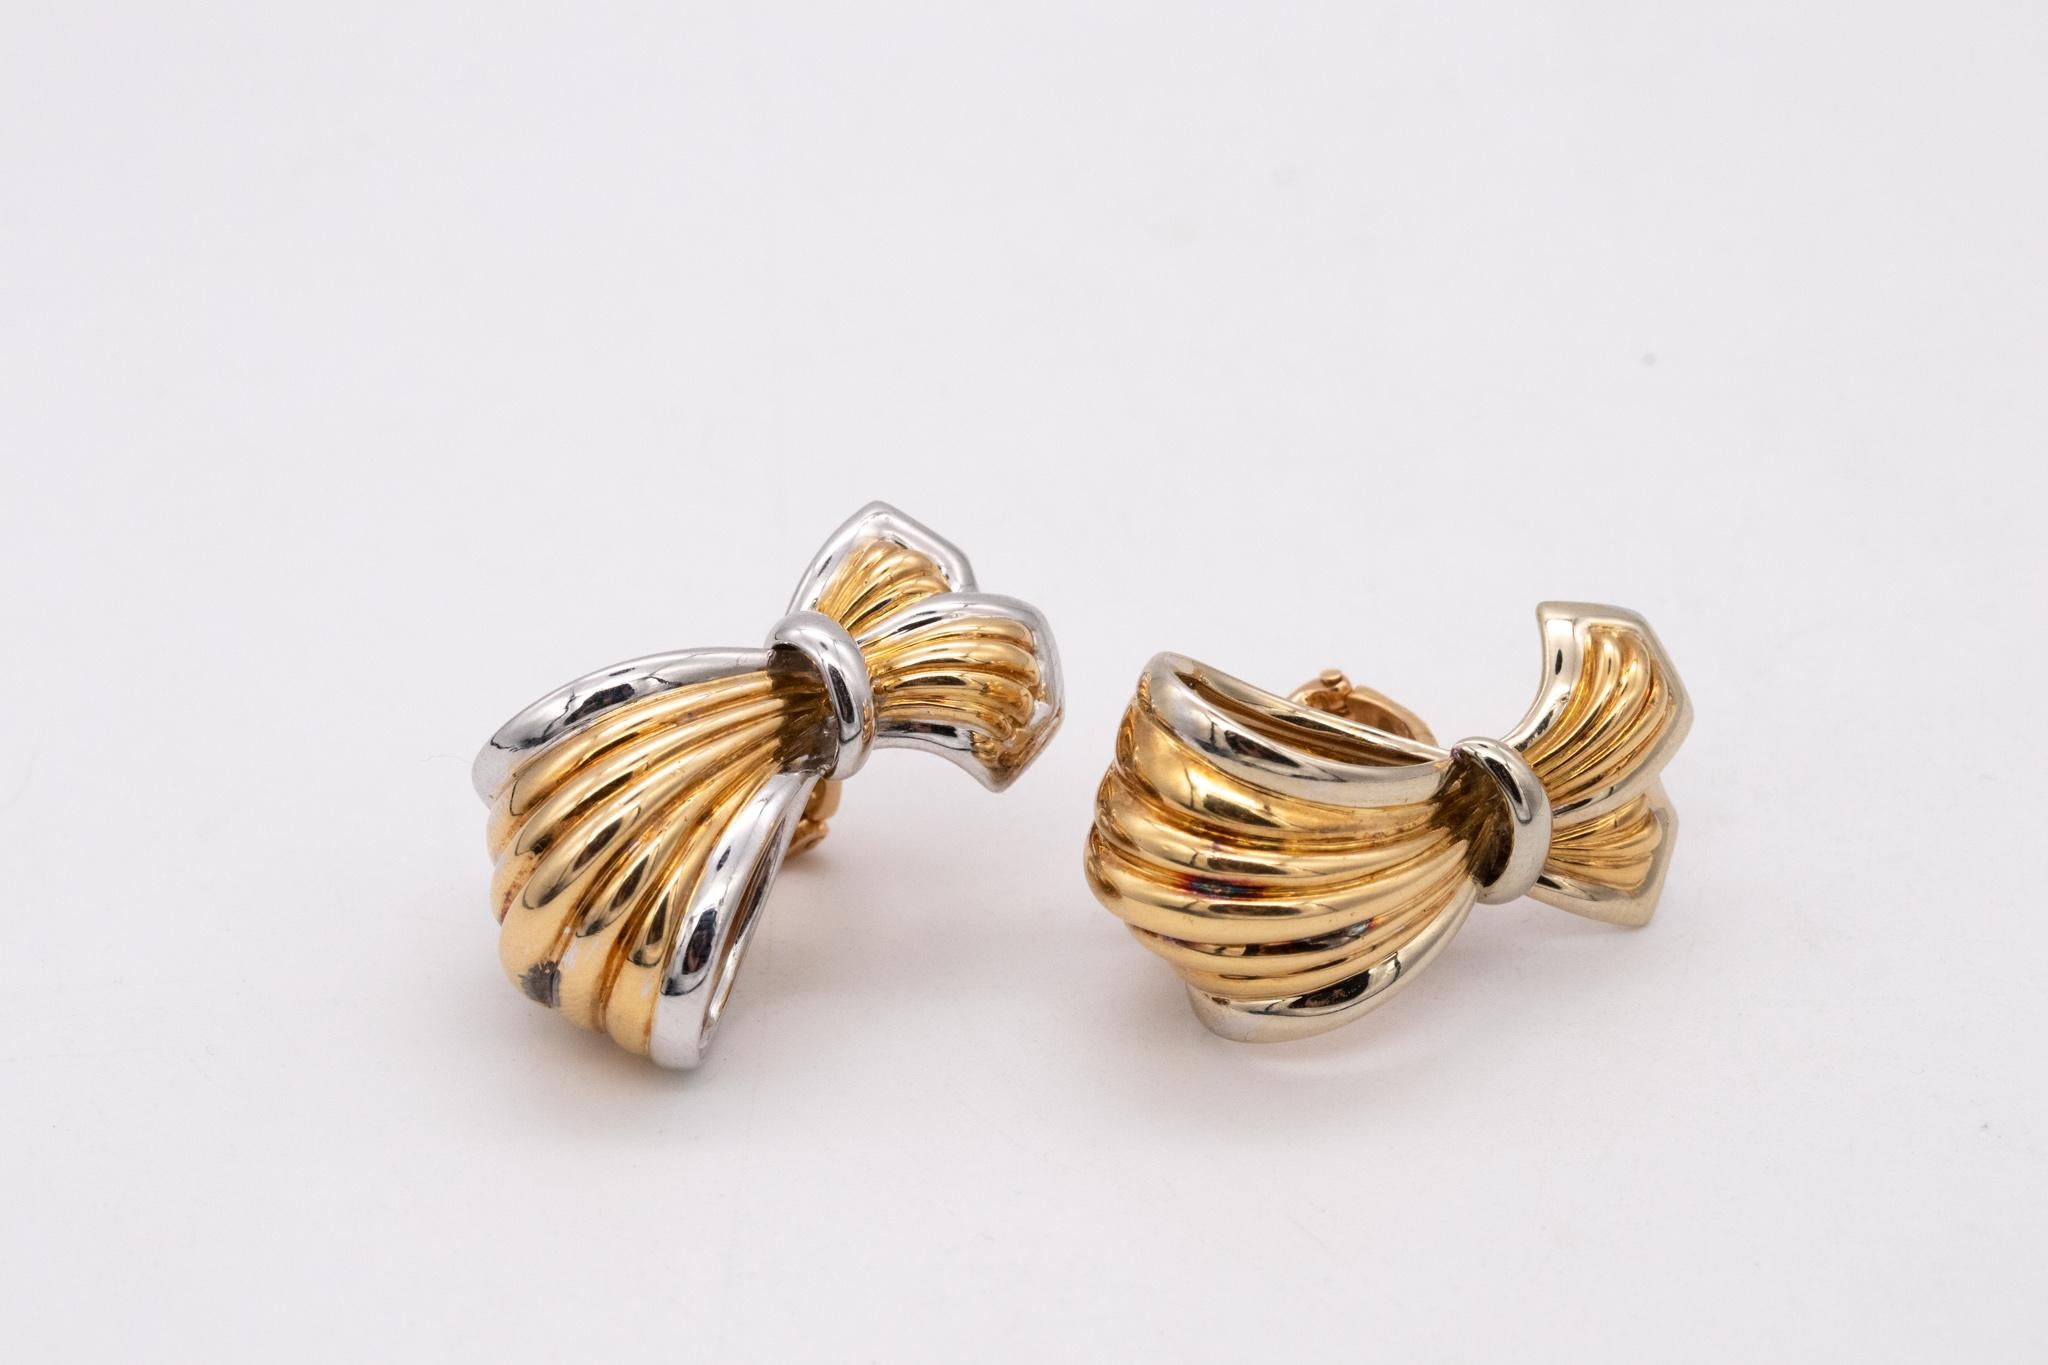 Boucheron Paris Large Ribbons Earrings with Fluted Pattern in Two Tones of 18kt For Sale 1